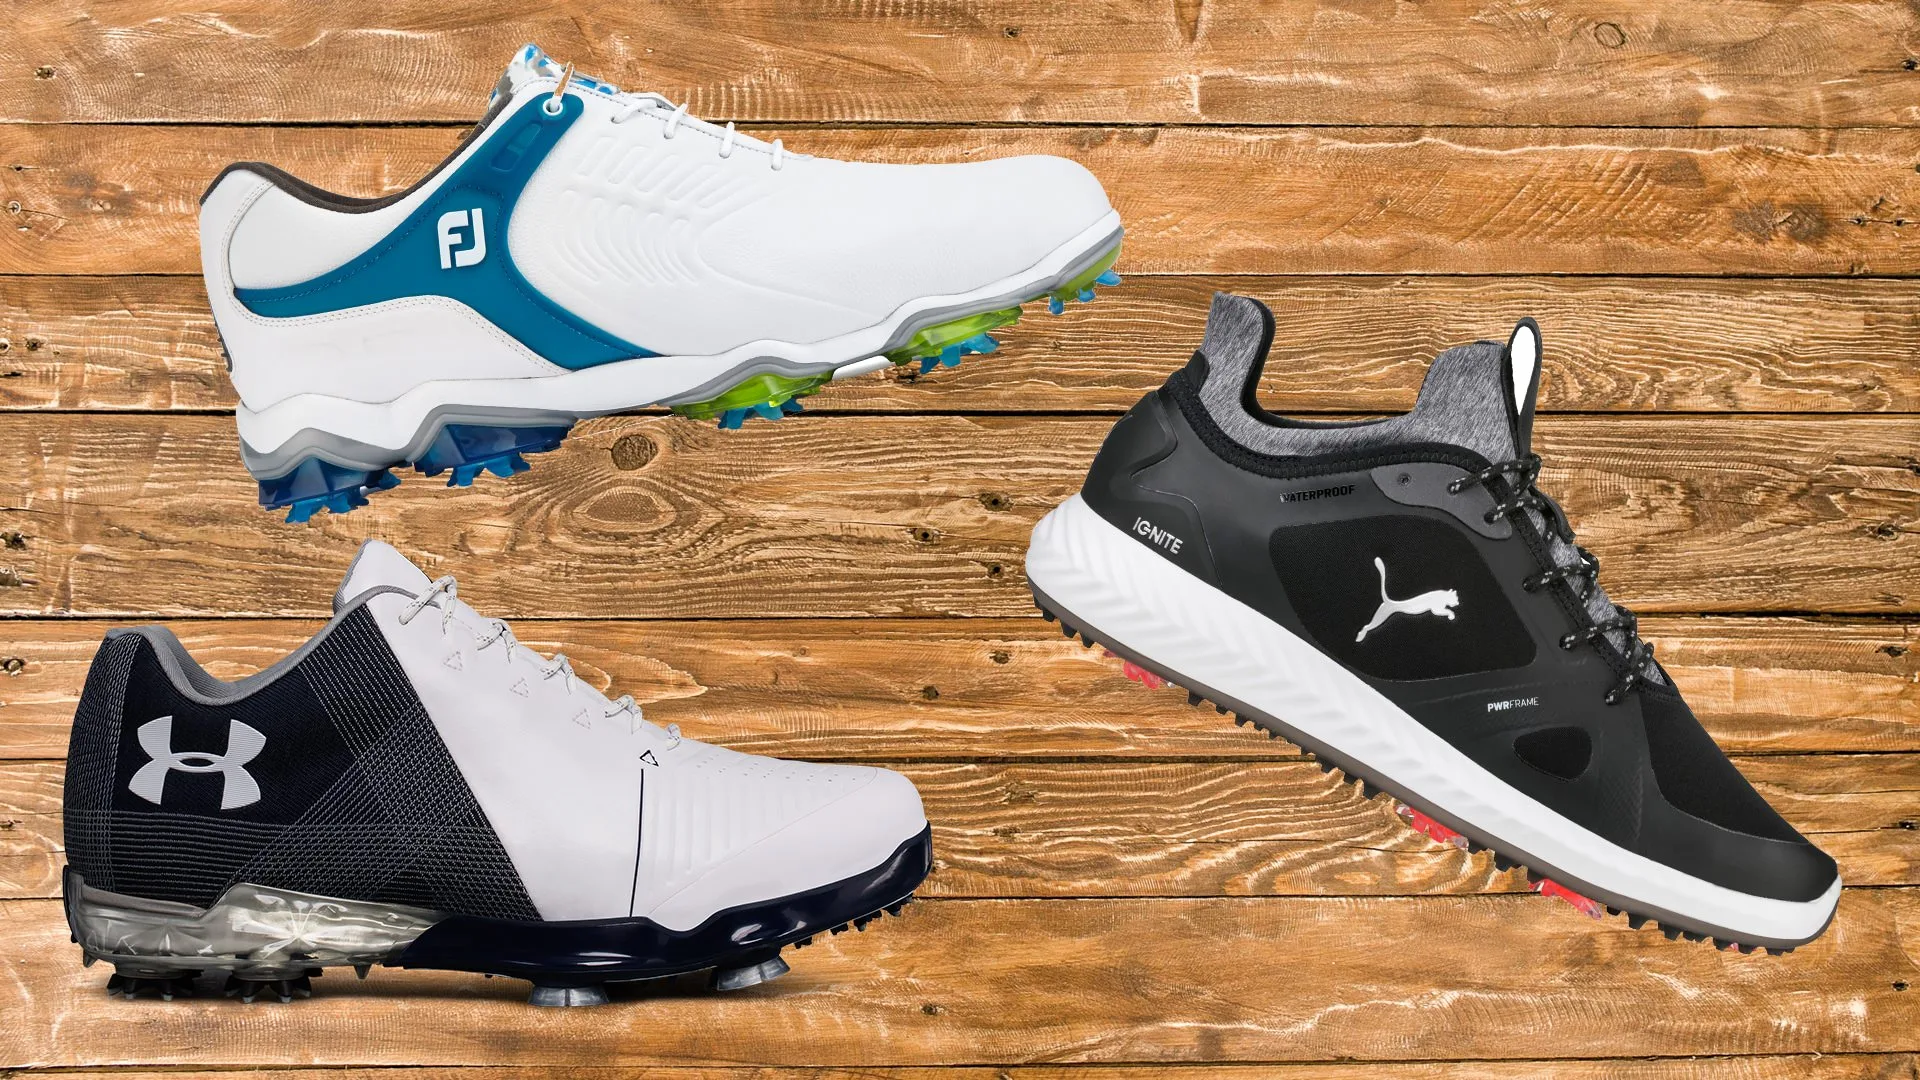 Best spiked golf shoes 2018